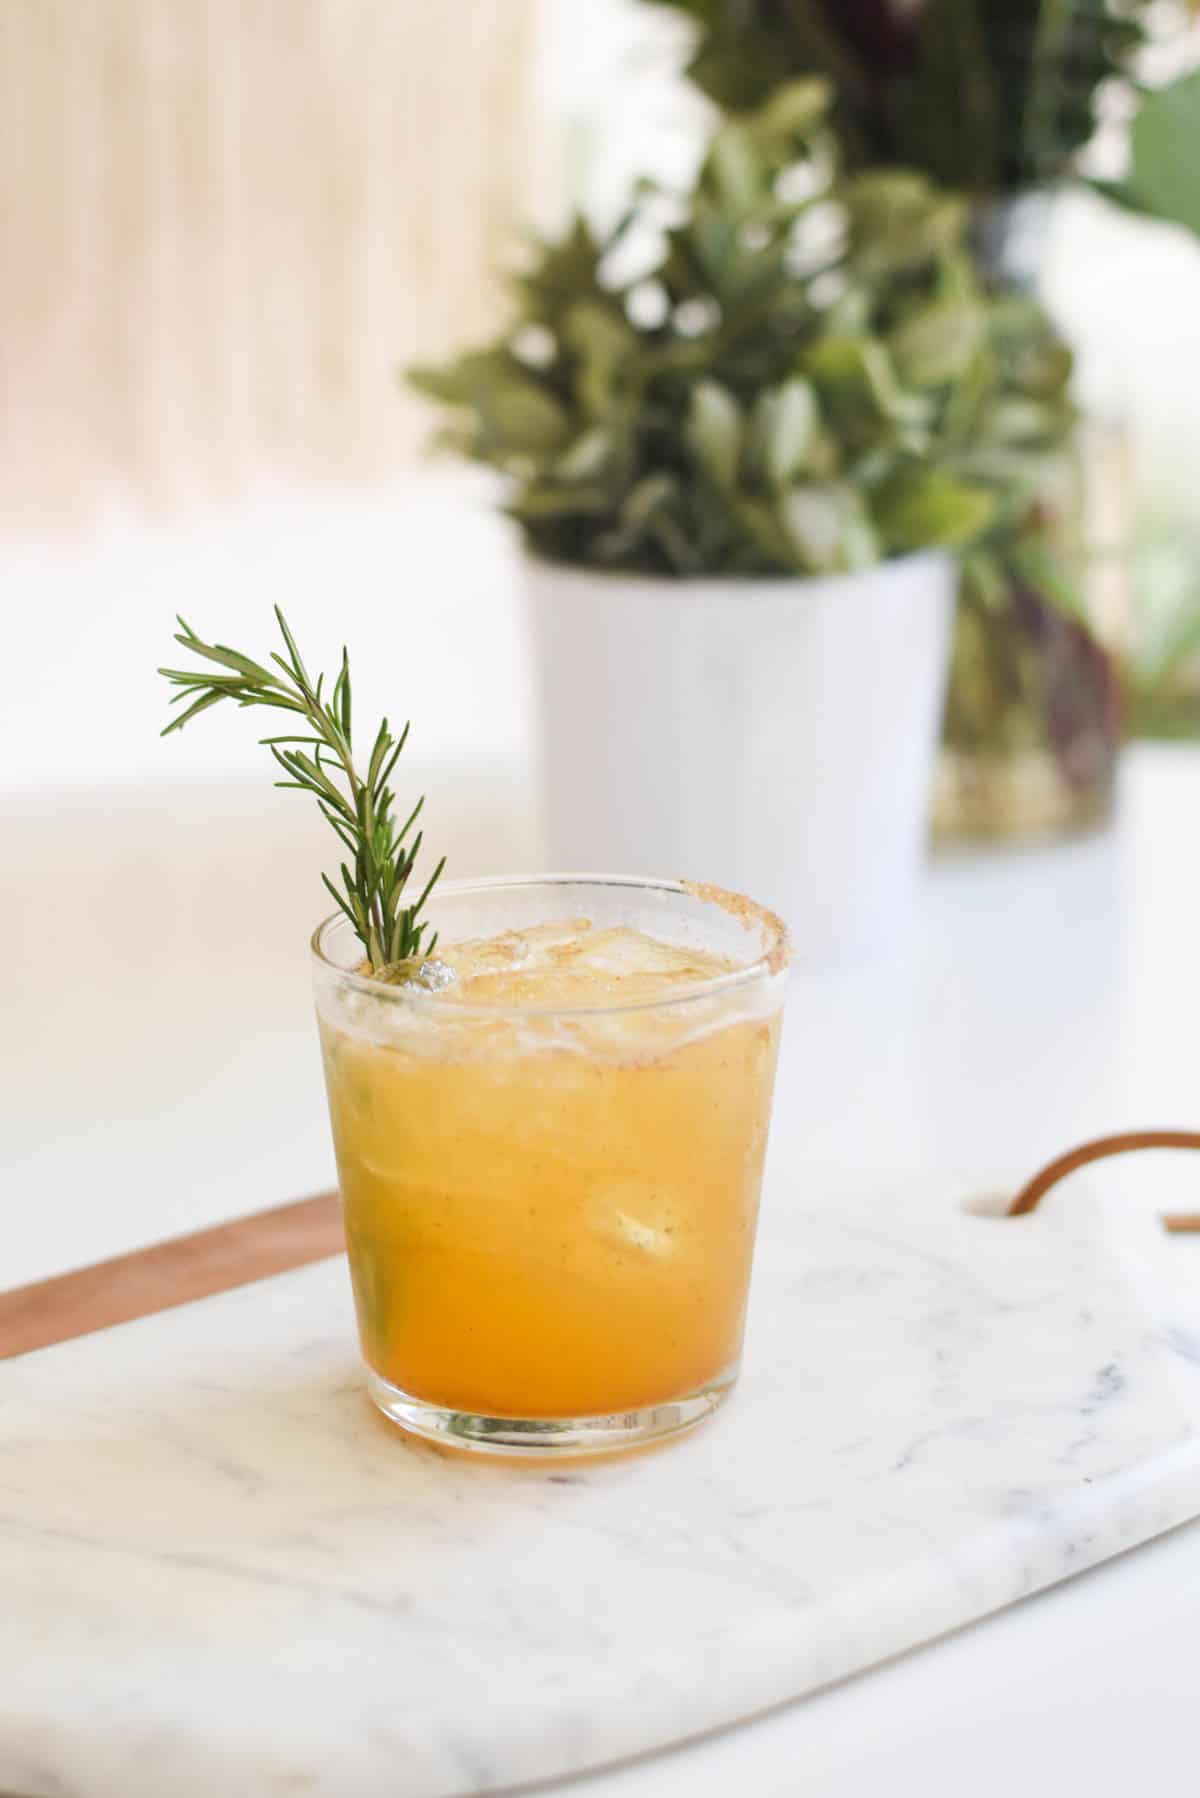 Cocktail on a table with rosemary sprig garnish.